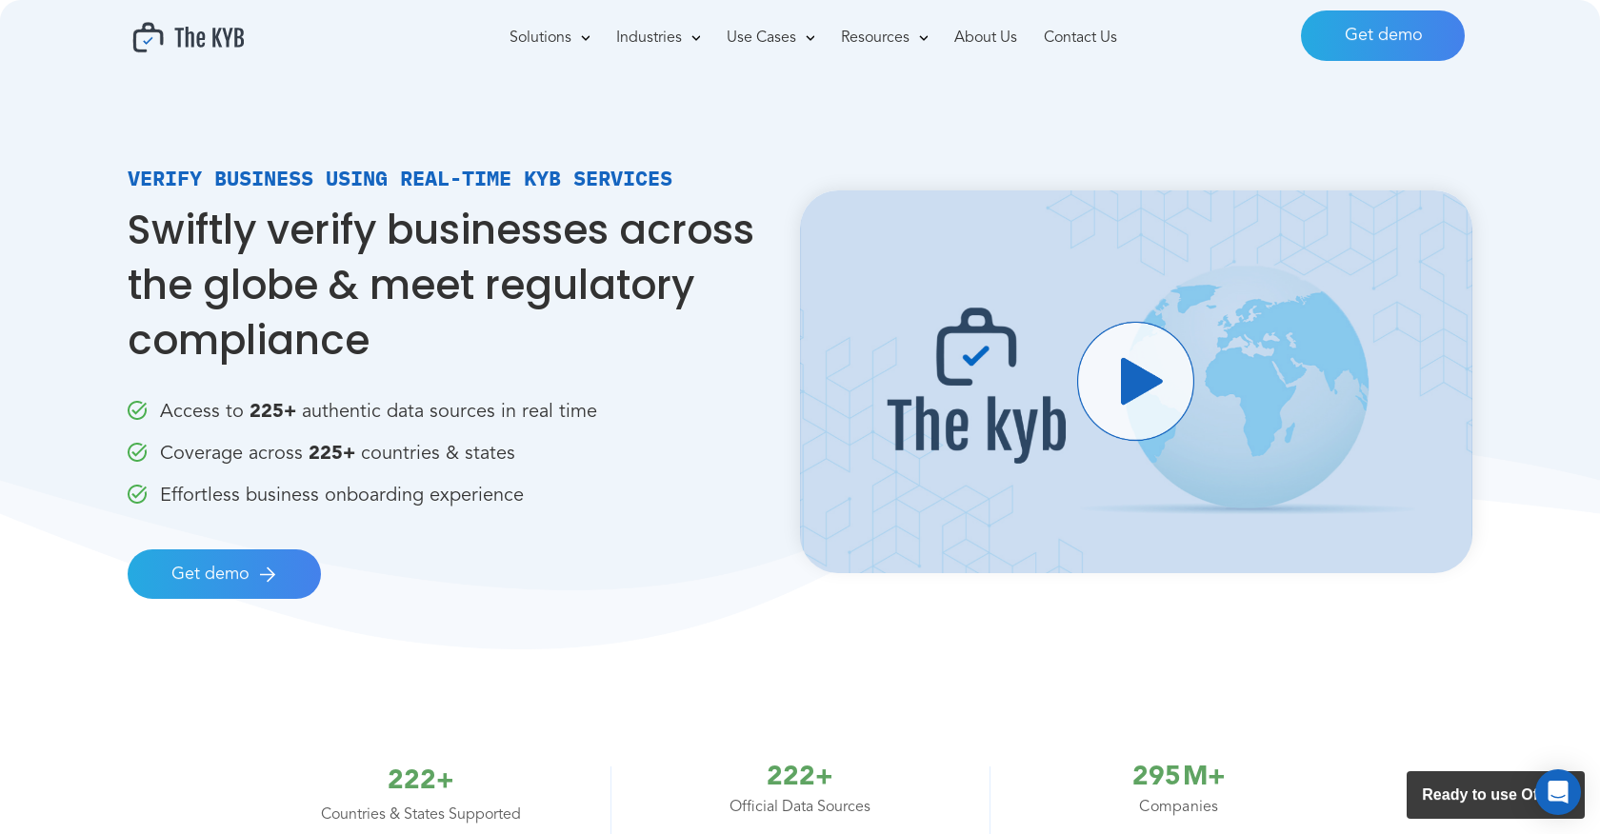 The KYB website